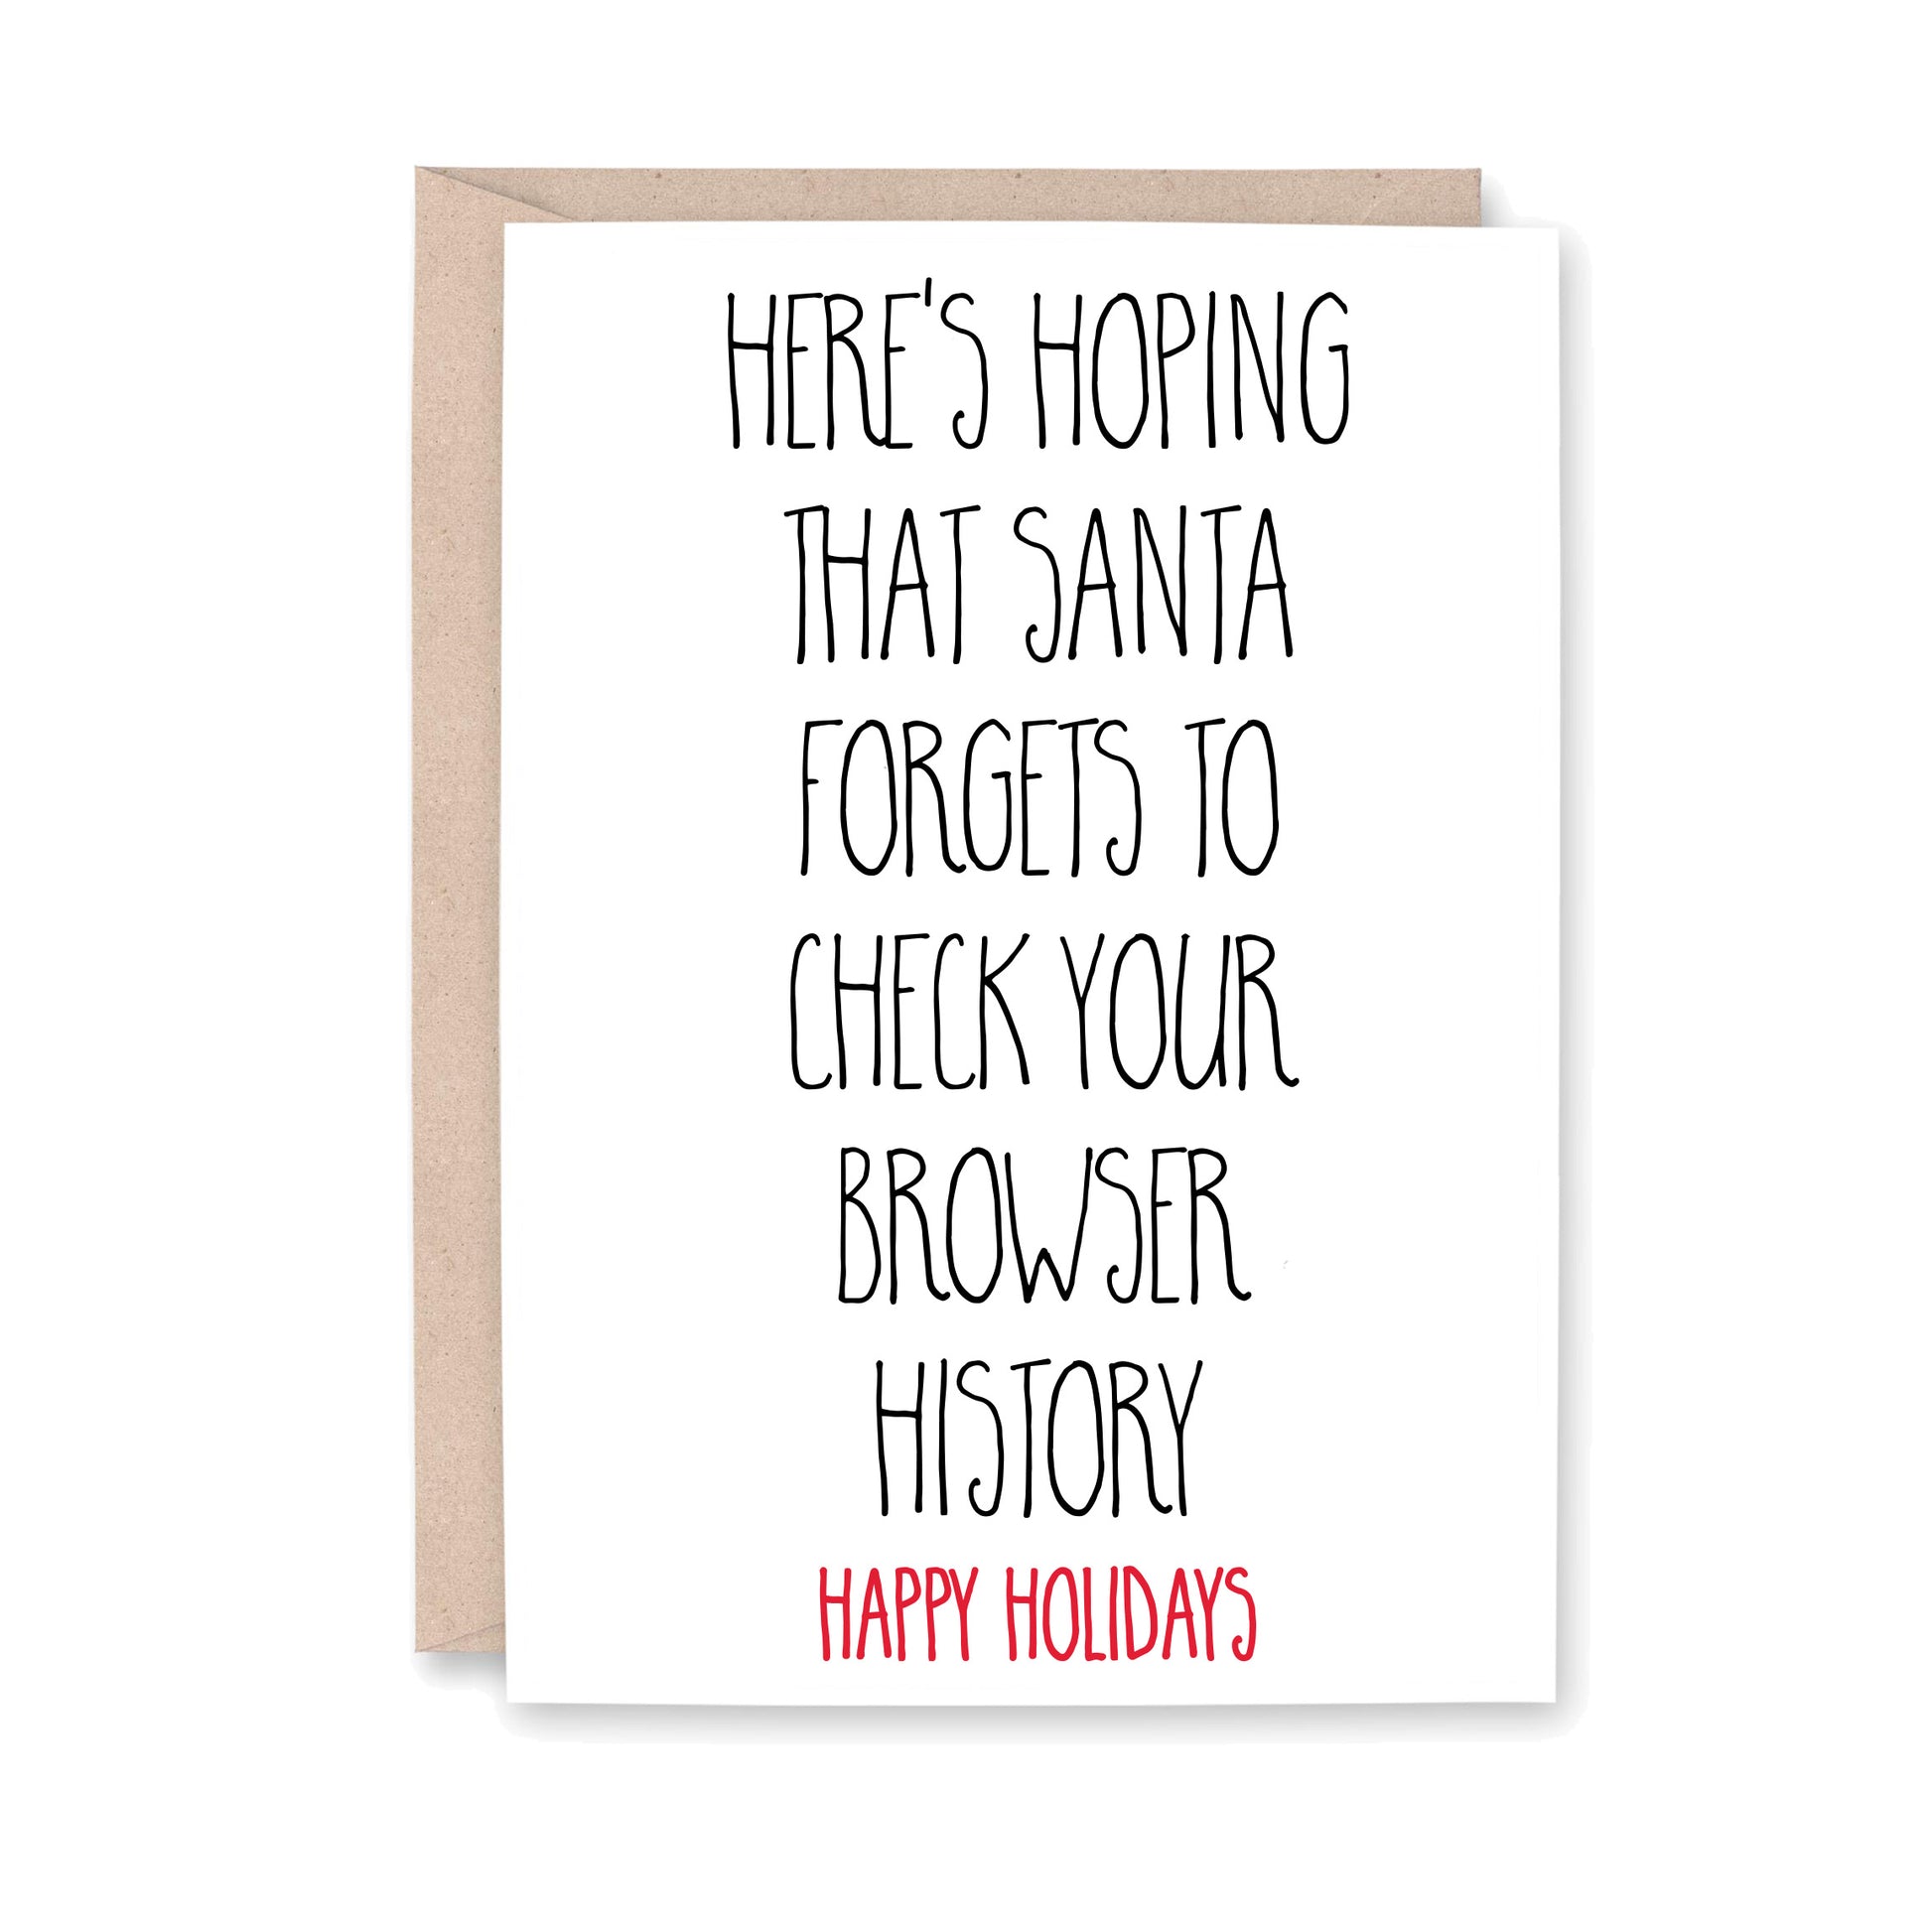 Here's hoping that Santa forgets to check your browser history Happy Holidays